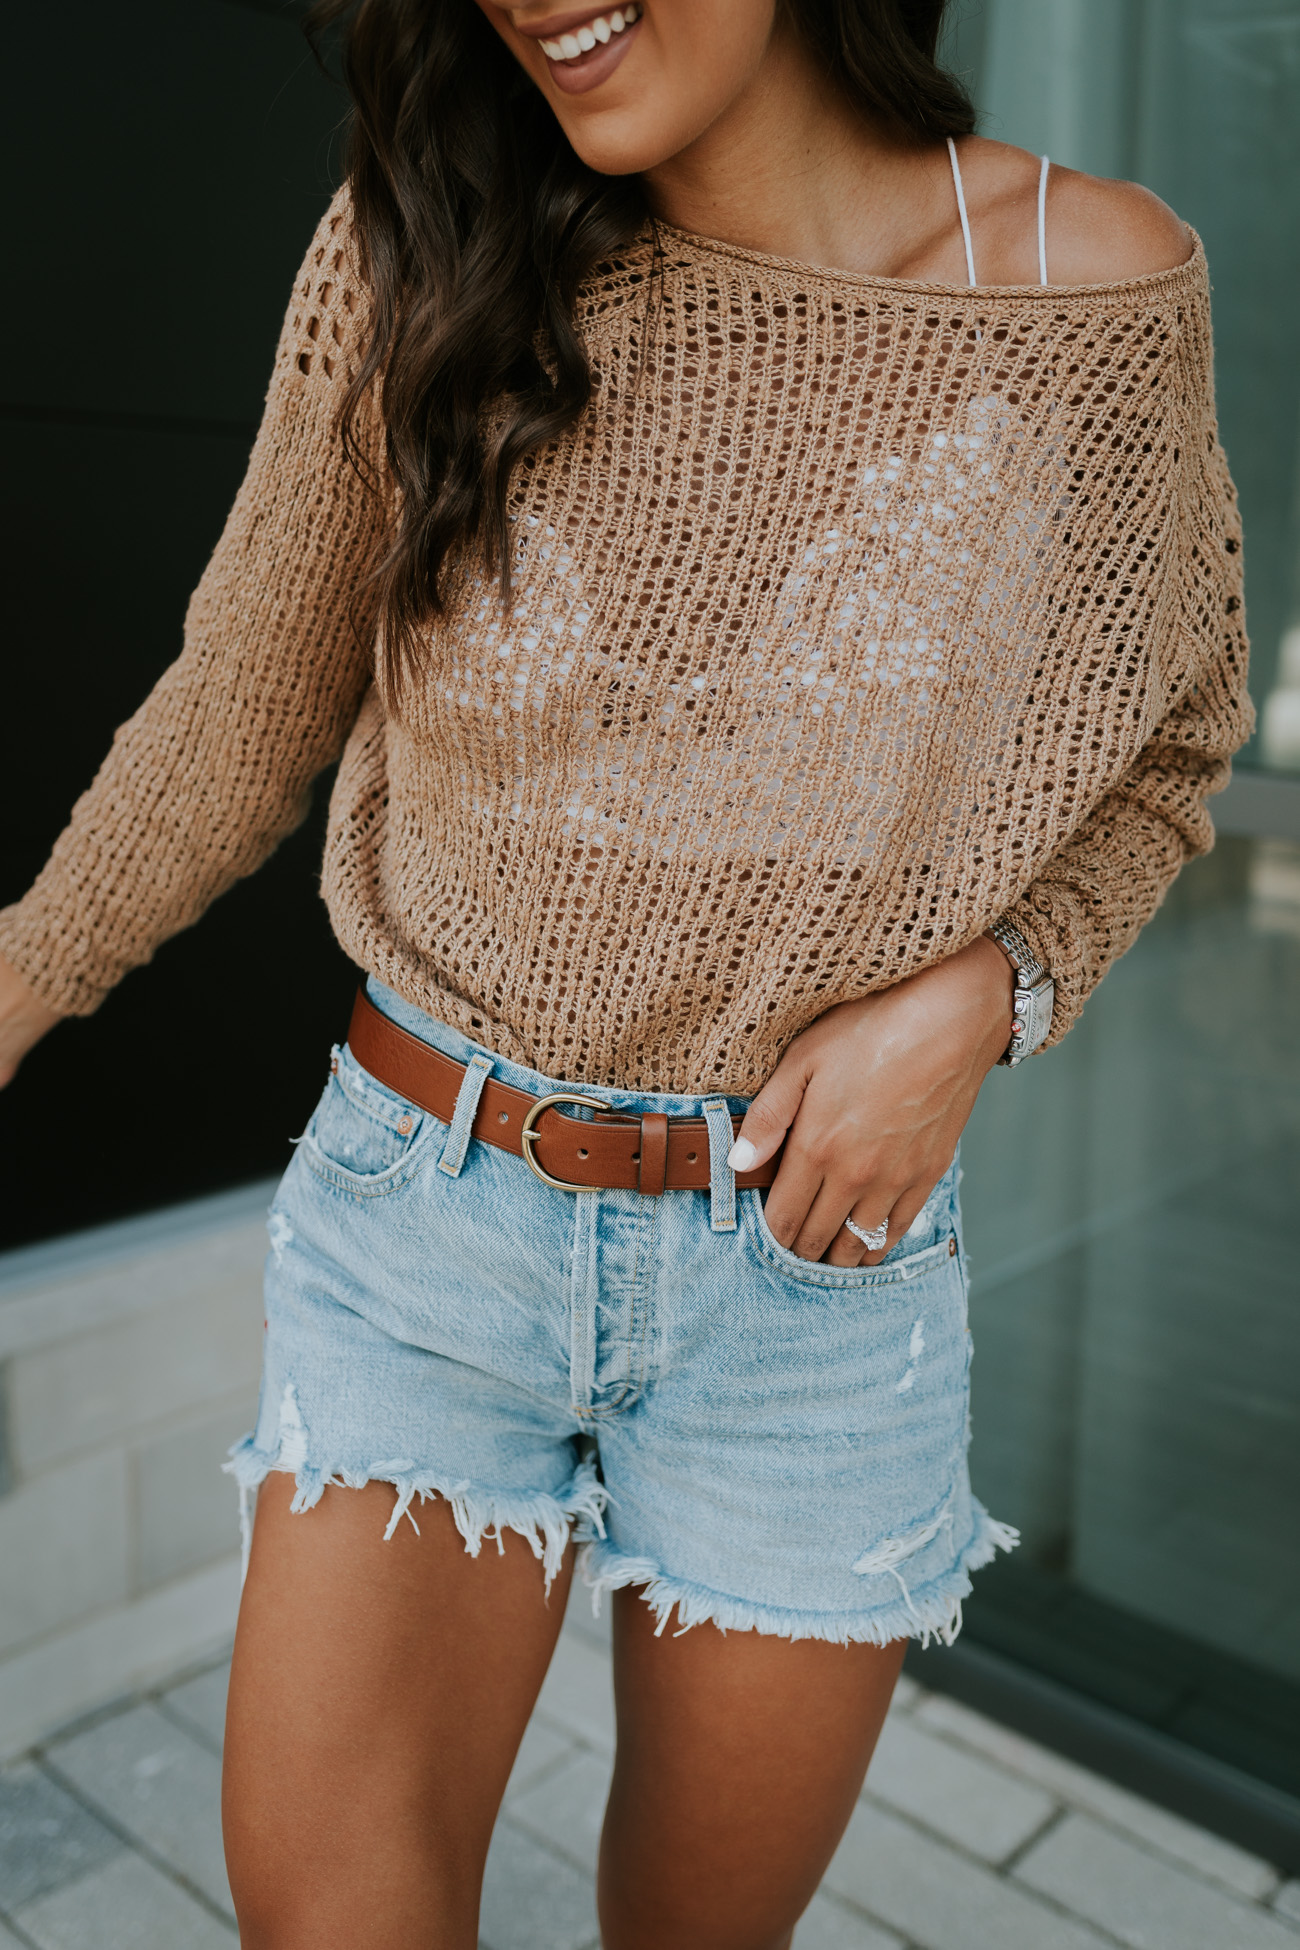 woven pullover, agolde shorts, agolde cutoff shorts, neutral pullover, 2018 nordstrom anniversary sale public access, shop nordstrom, nordstrom shoes, nordstrom dresses, nordstrom handbag sale, nordstrom anniversary sale dates, Nordstrom Anniversary Sale 2018, nordstrom anniversary sale picks, nordstrom anniversary sale catalog, sale picks for nordstrom anniversary sale 2018, information on nordstrom anniversary sale, nordstrom credit card, nordstrom debit card, nordstrom rewards, nordstrom sale, nordstrom anniversary sale finds, nsale finds, nsale picks, nike on sale, cute fall outfit, fall style, fall inspo, fall sale, nordstrom anniversary sale public access, 2018 nordstrom anniversary sale public access // grace wainwright a southern drawl